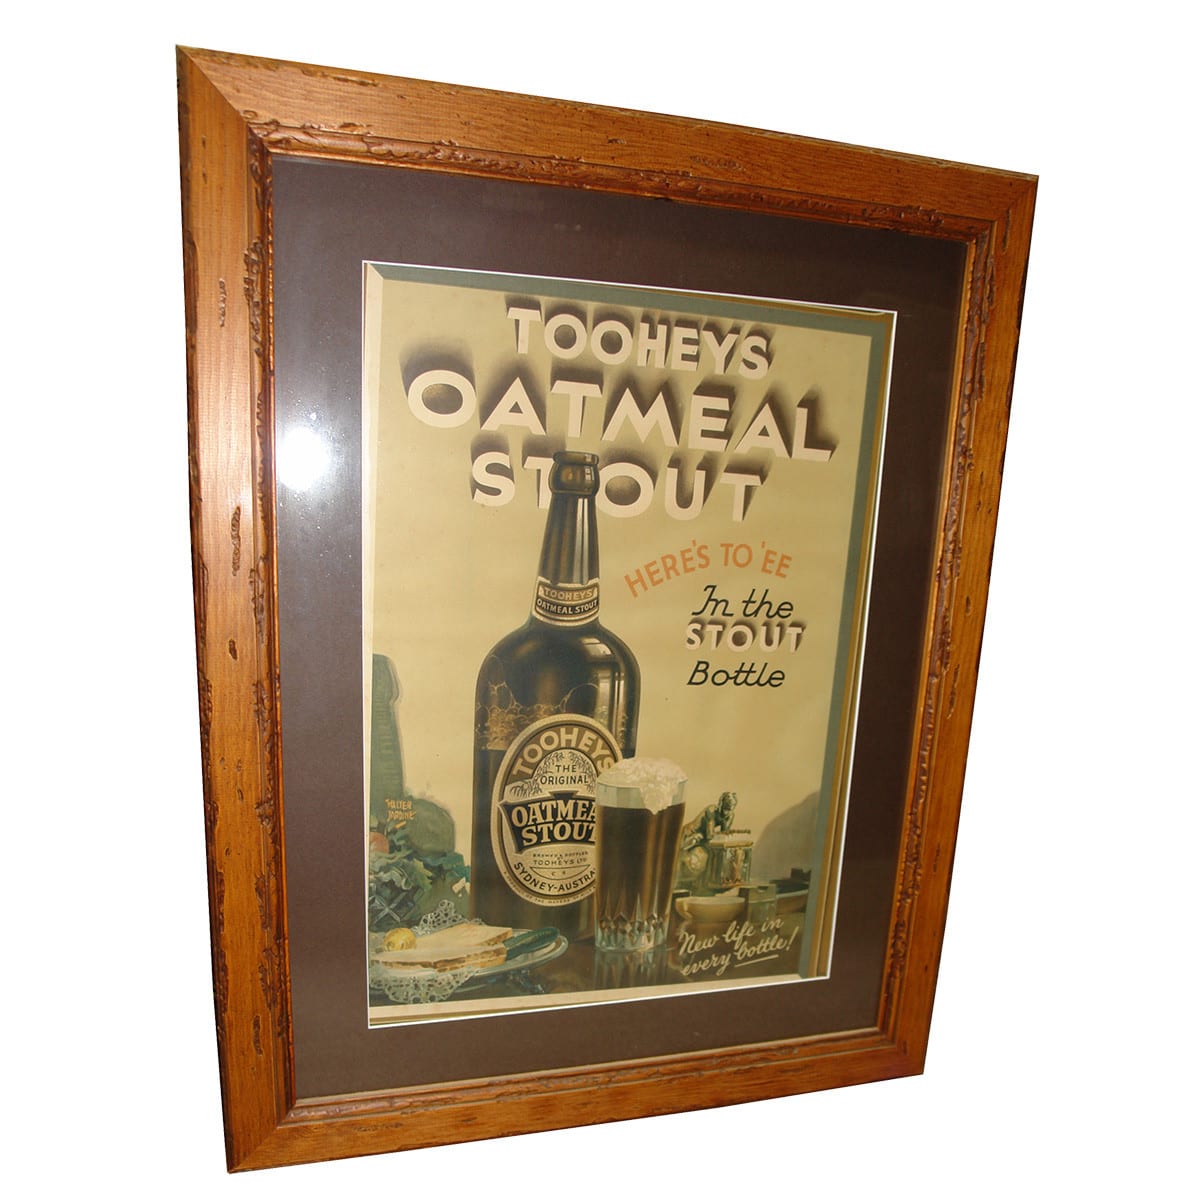 Framed Advertising Poster. Tooheys Oatmeal Stout. Sydney. (New South Wales)